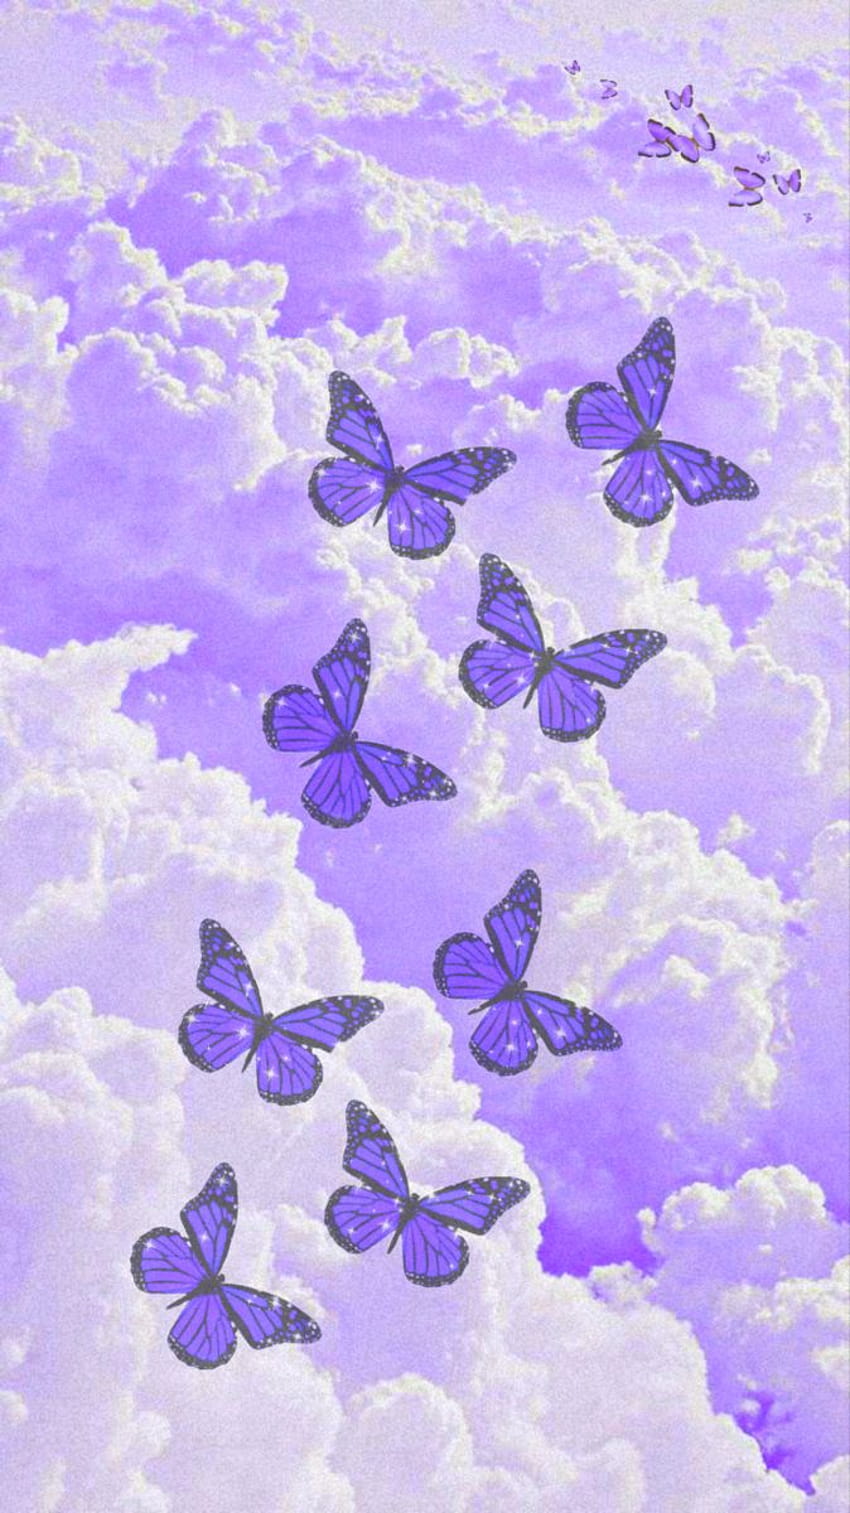 Aesthetic Sparkles Purple Butterflies posted by Michelle Johnson, glitter butterfly HD phone wallpaper